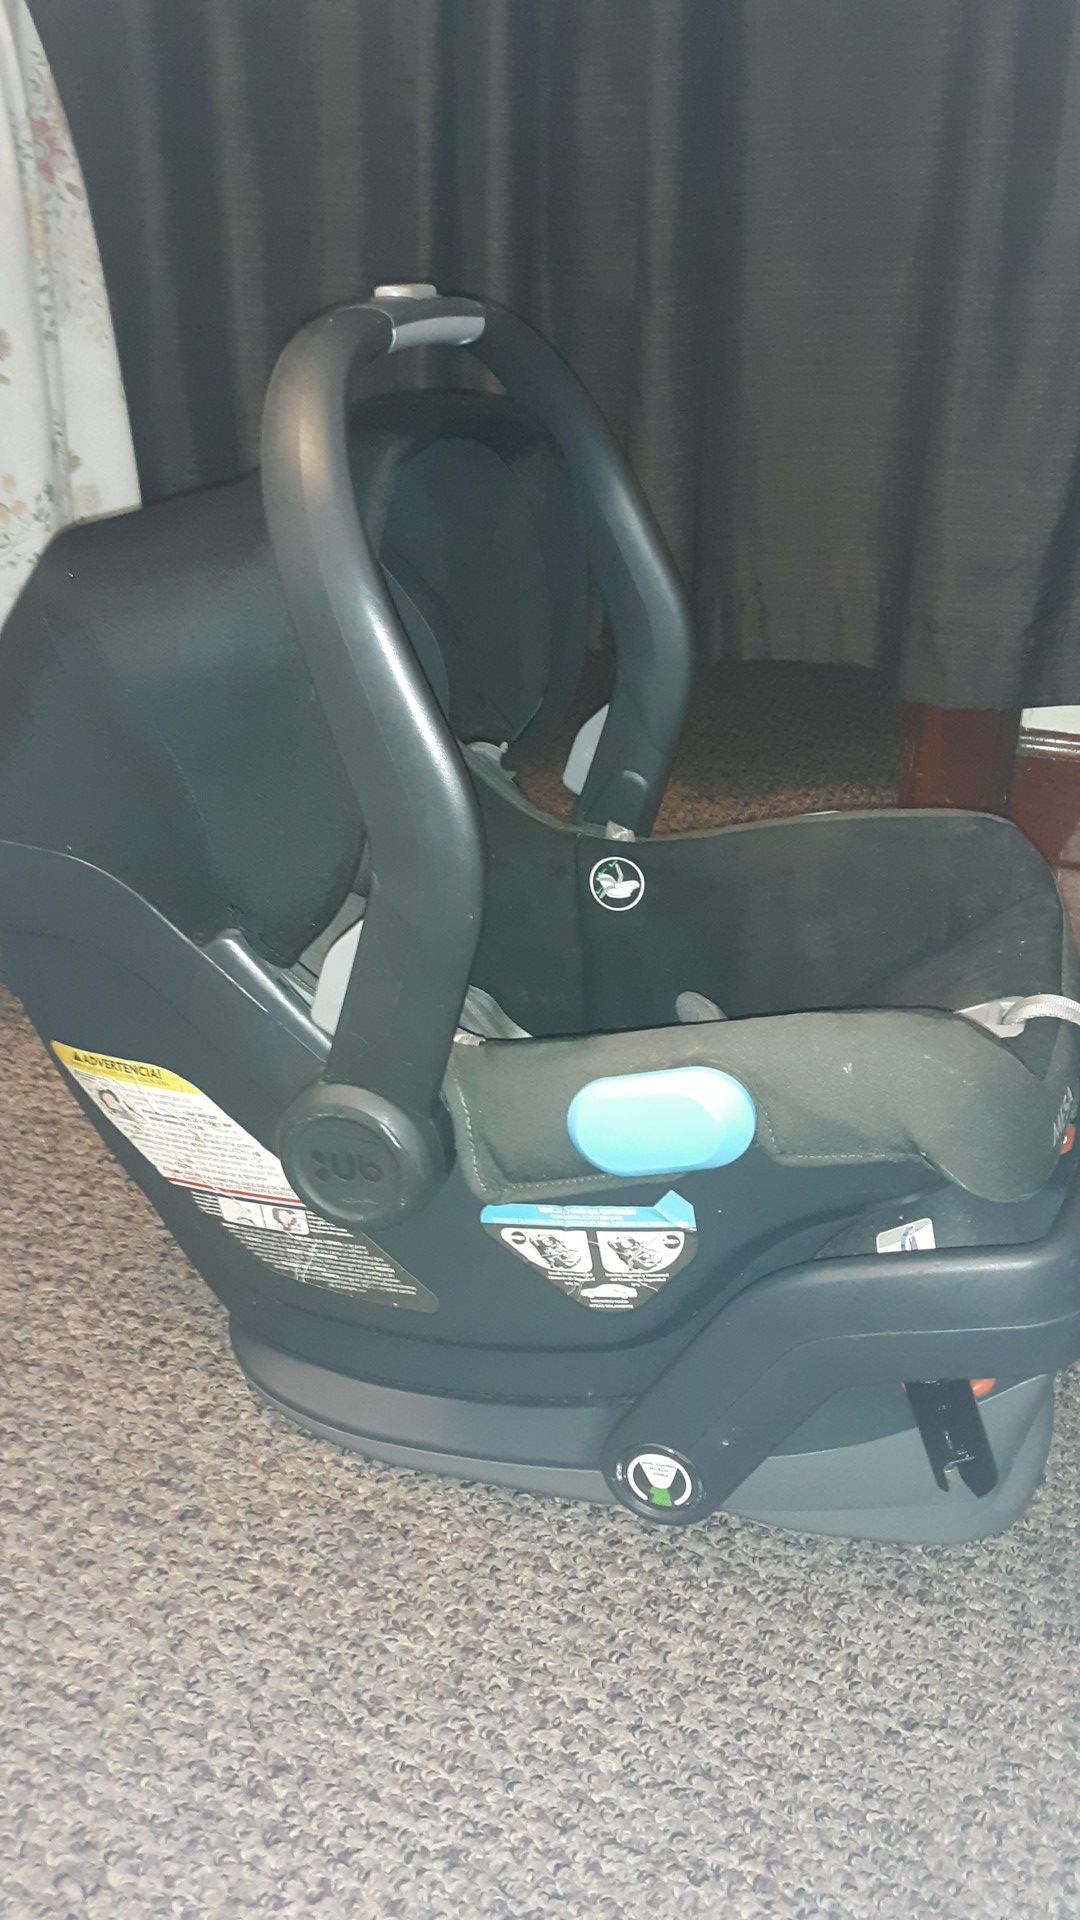 Uppababy Mesa car seat and carrier in great condition only 25$ cost 129.00